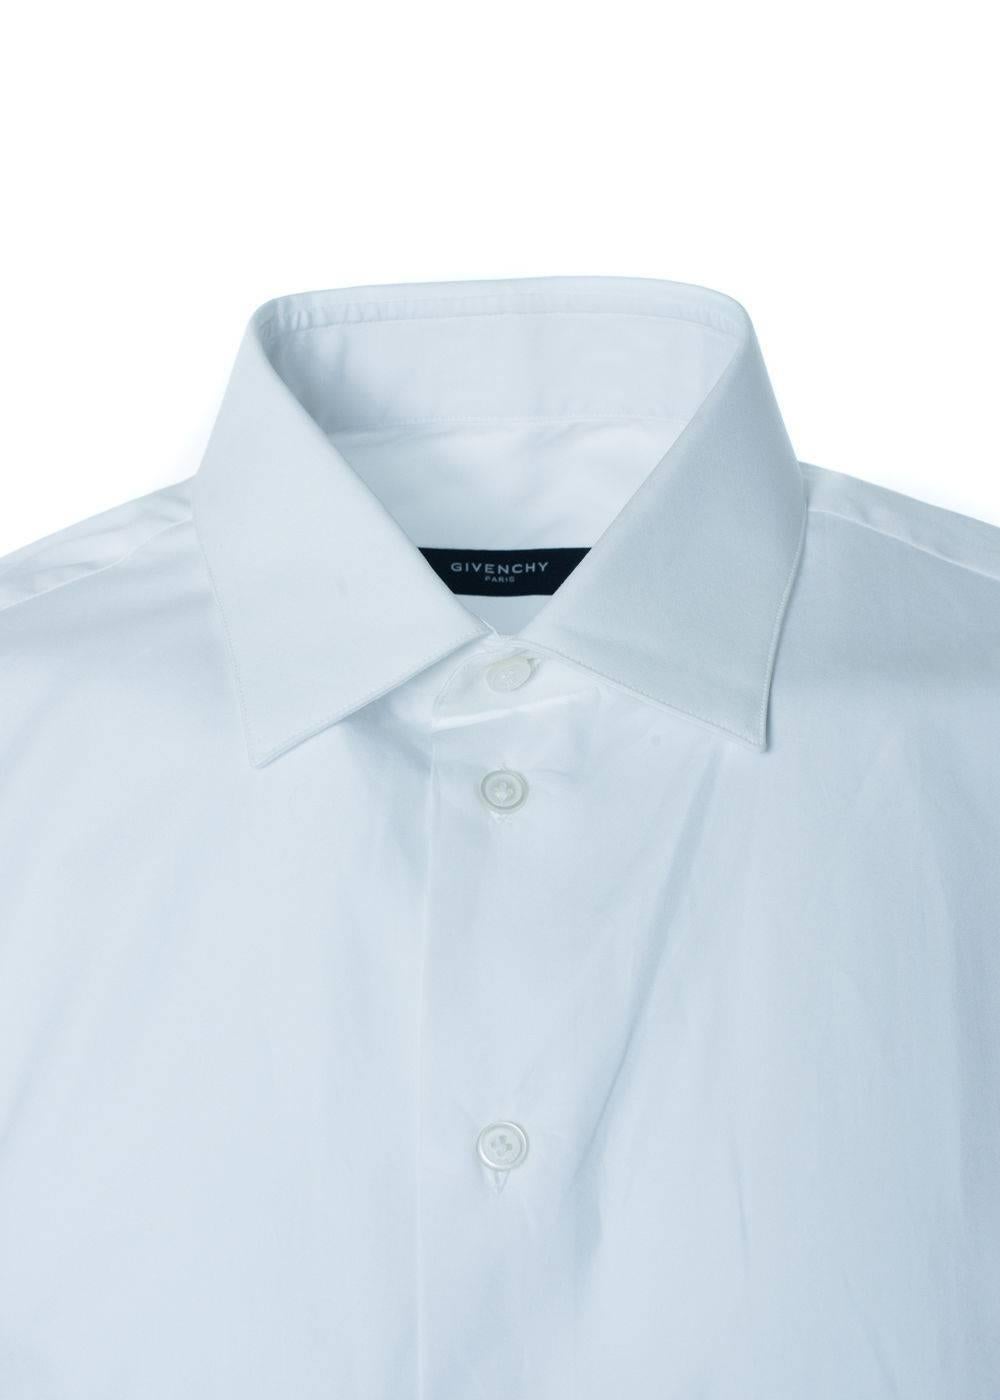 Brand New Givenchy Men's Button Down 
Original Tags
Retails in Stores & Online for $350
Men's Size E43 (XS) Fits True to Size

Every man needs a classic white button down for those professional settings or dressy outings. This Givenchy button down